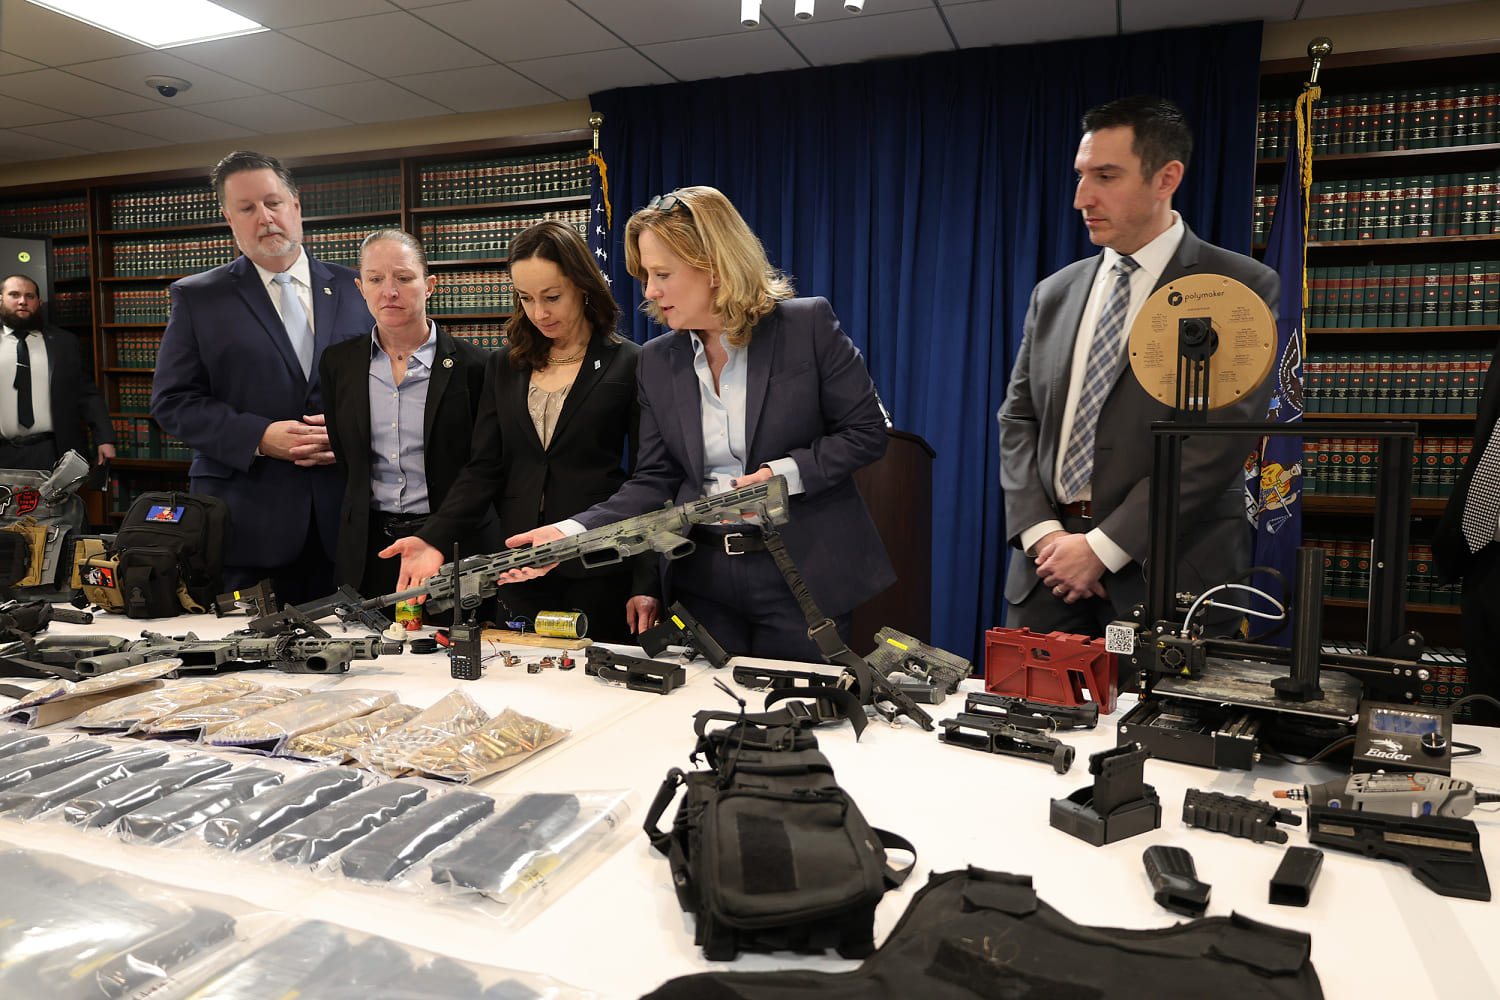 New York brothers face 130 charges over huge weapons stash and celebrity 'hitlist'